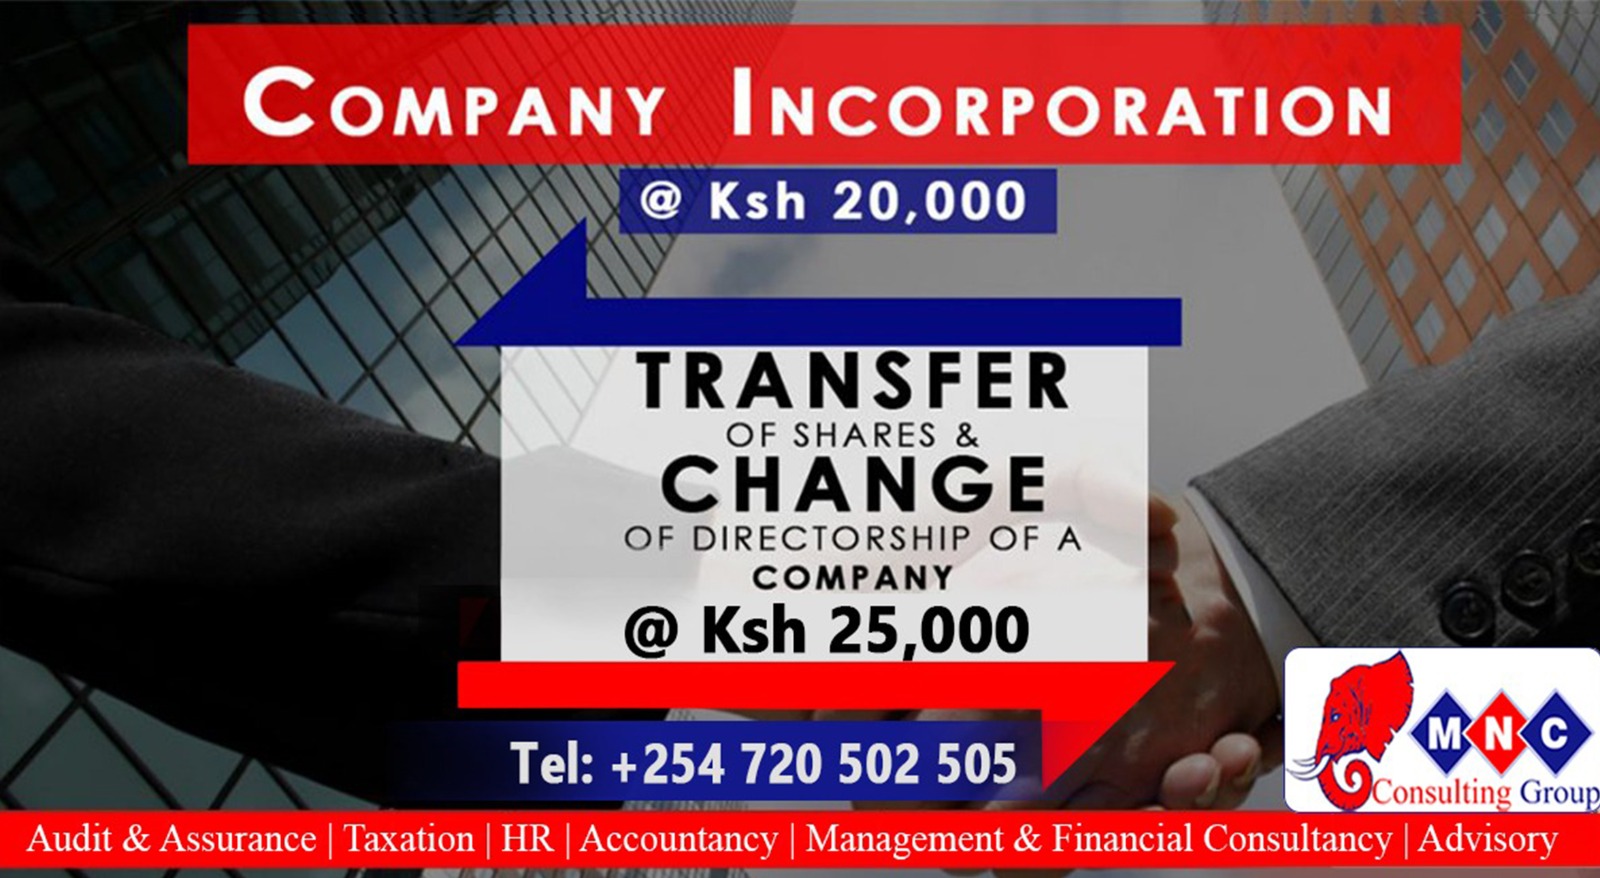 Transaction Cost of Company Registration, Transfer of Shares and Change of Directorship​